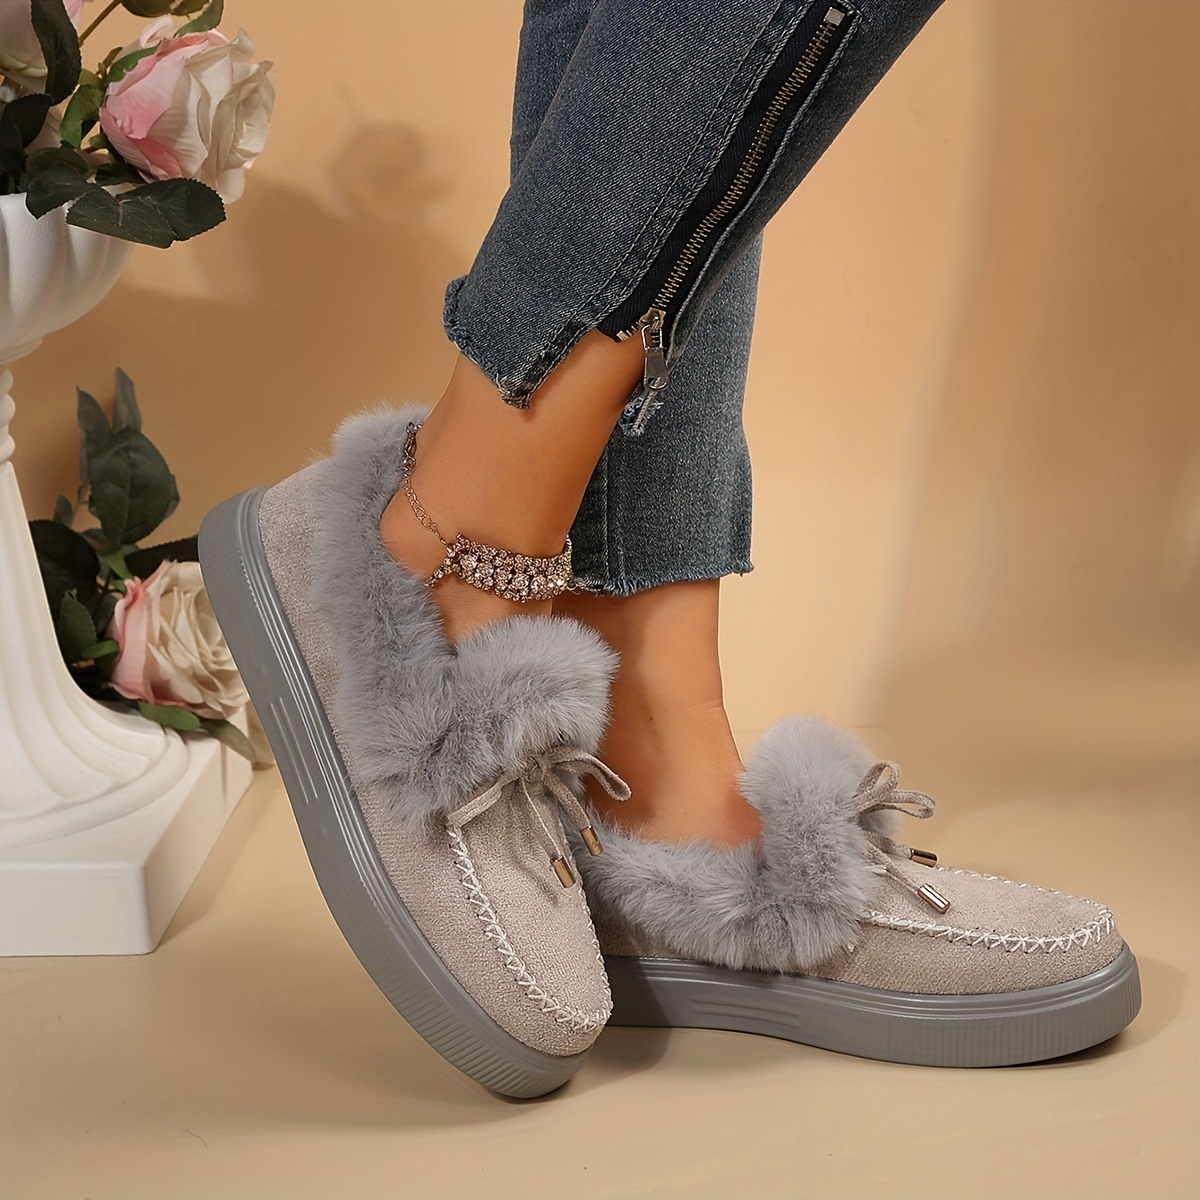 Women s Fluffy Fleece Lining Snow Boots Solid Color Bowknot Slip On Ankle Boots Cozy Winter Warm Flat Boots details 5